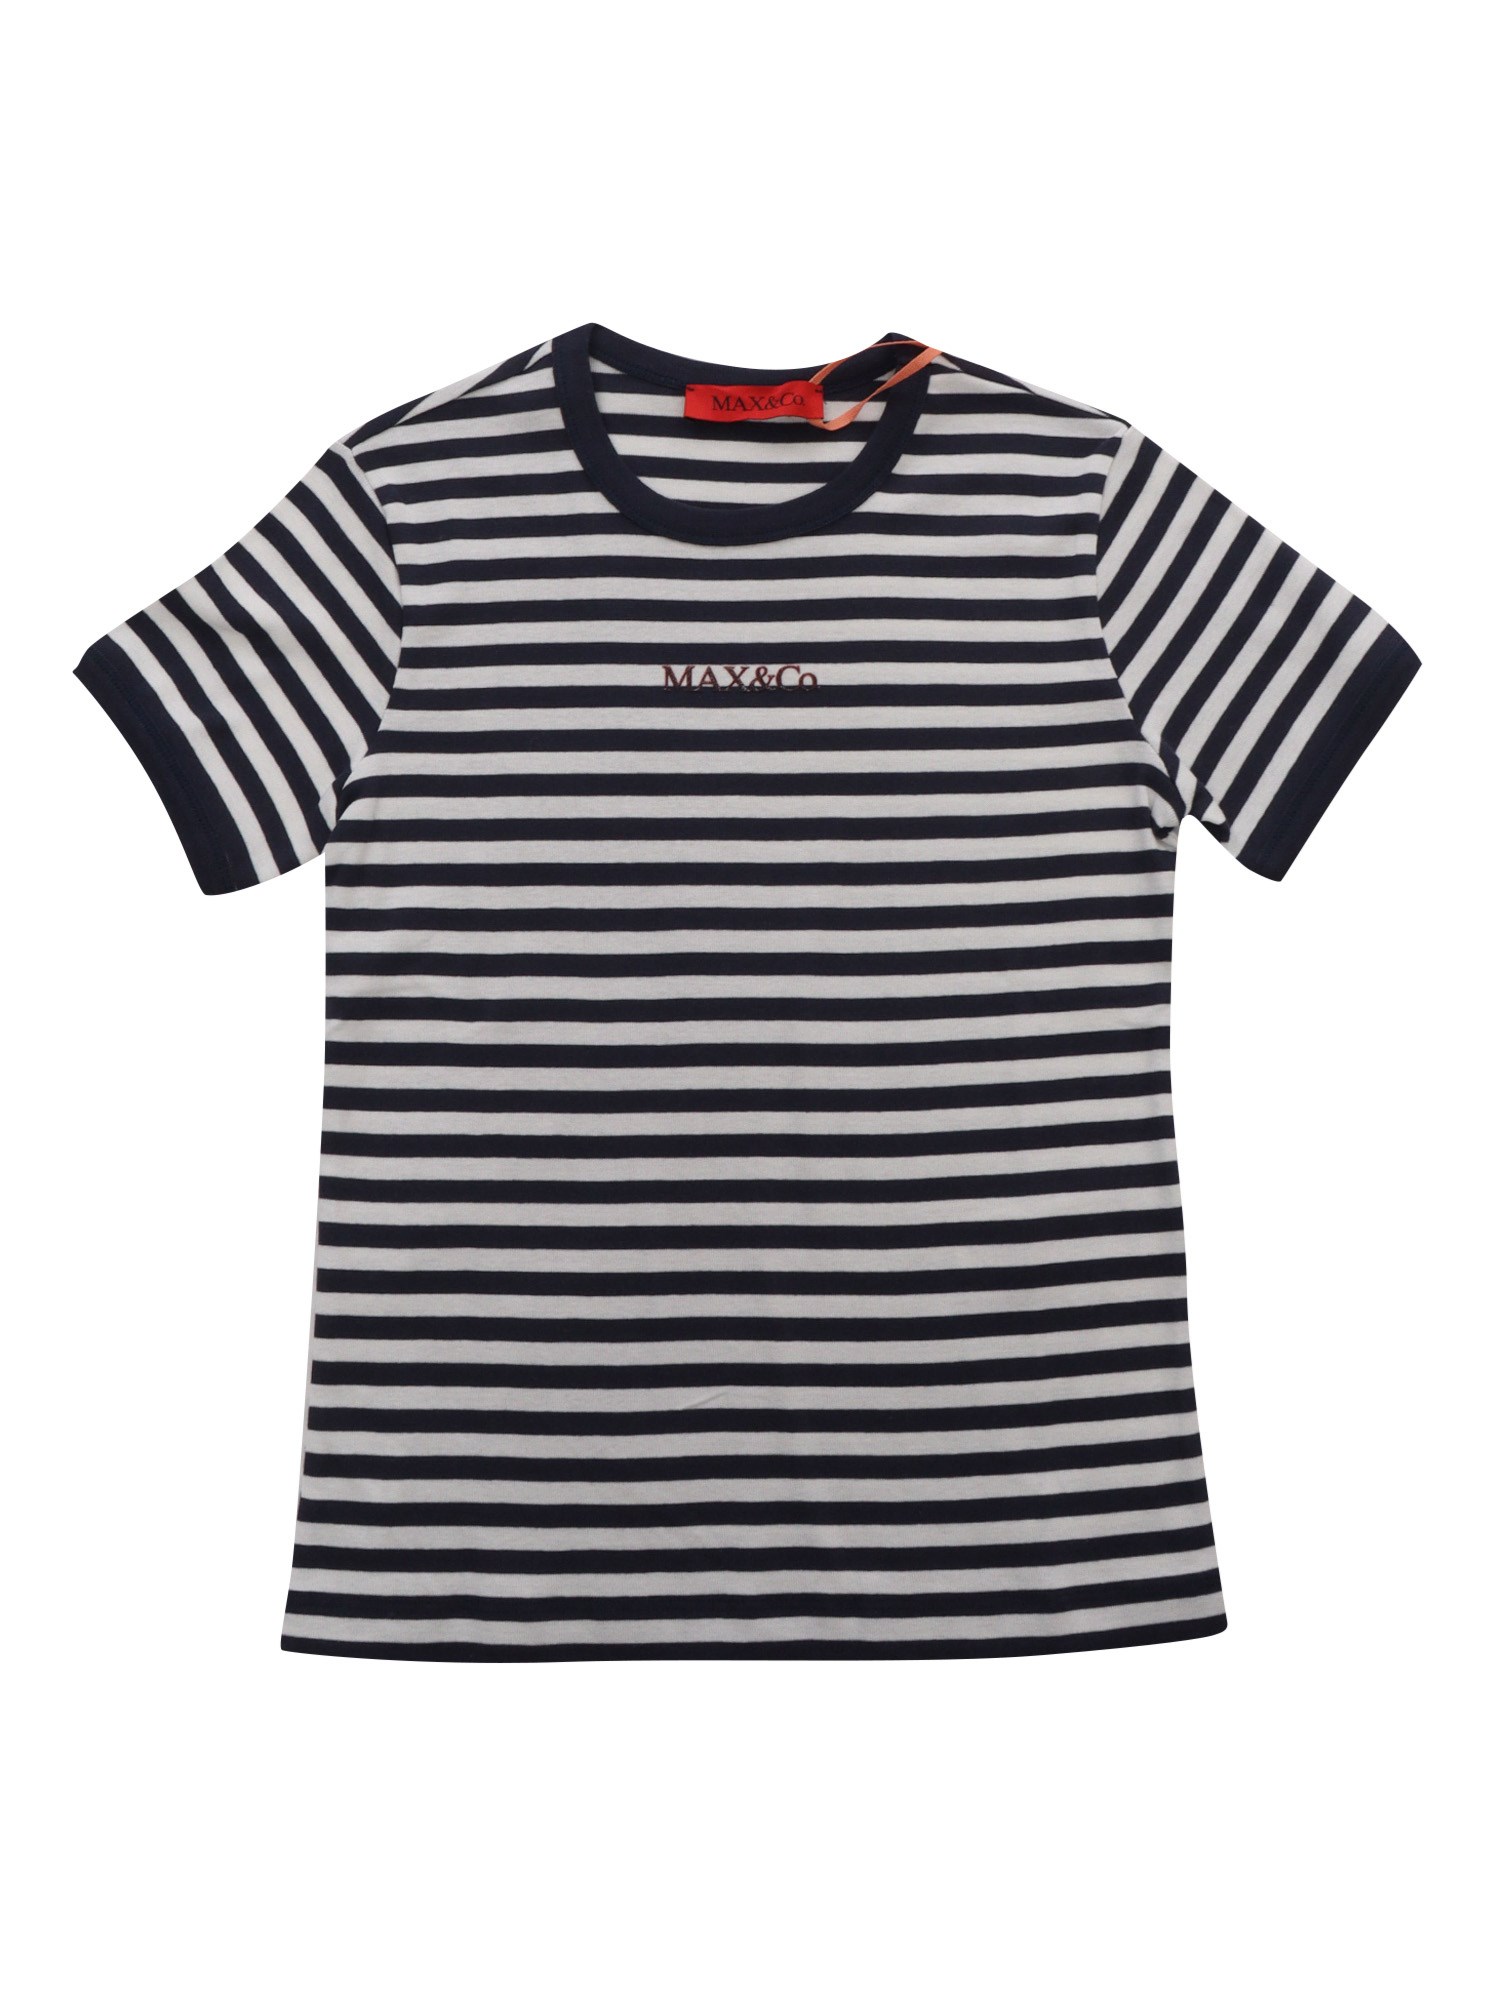 Max & Co Black Striped T-shirt In Blue